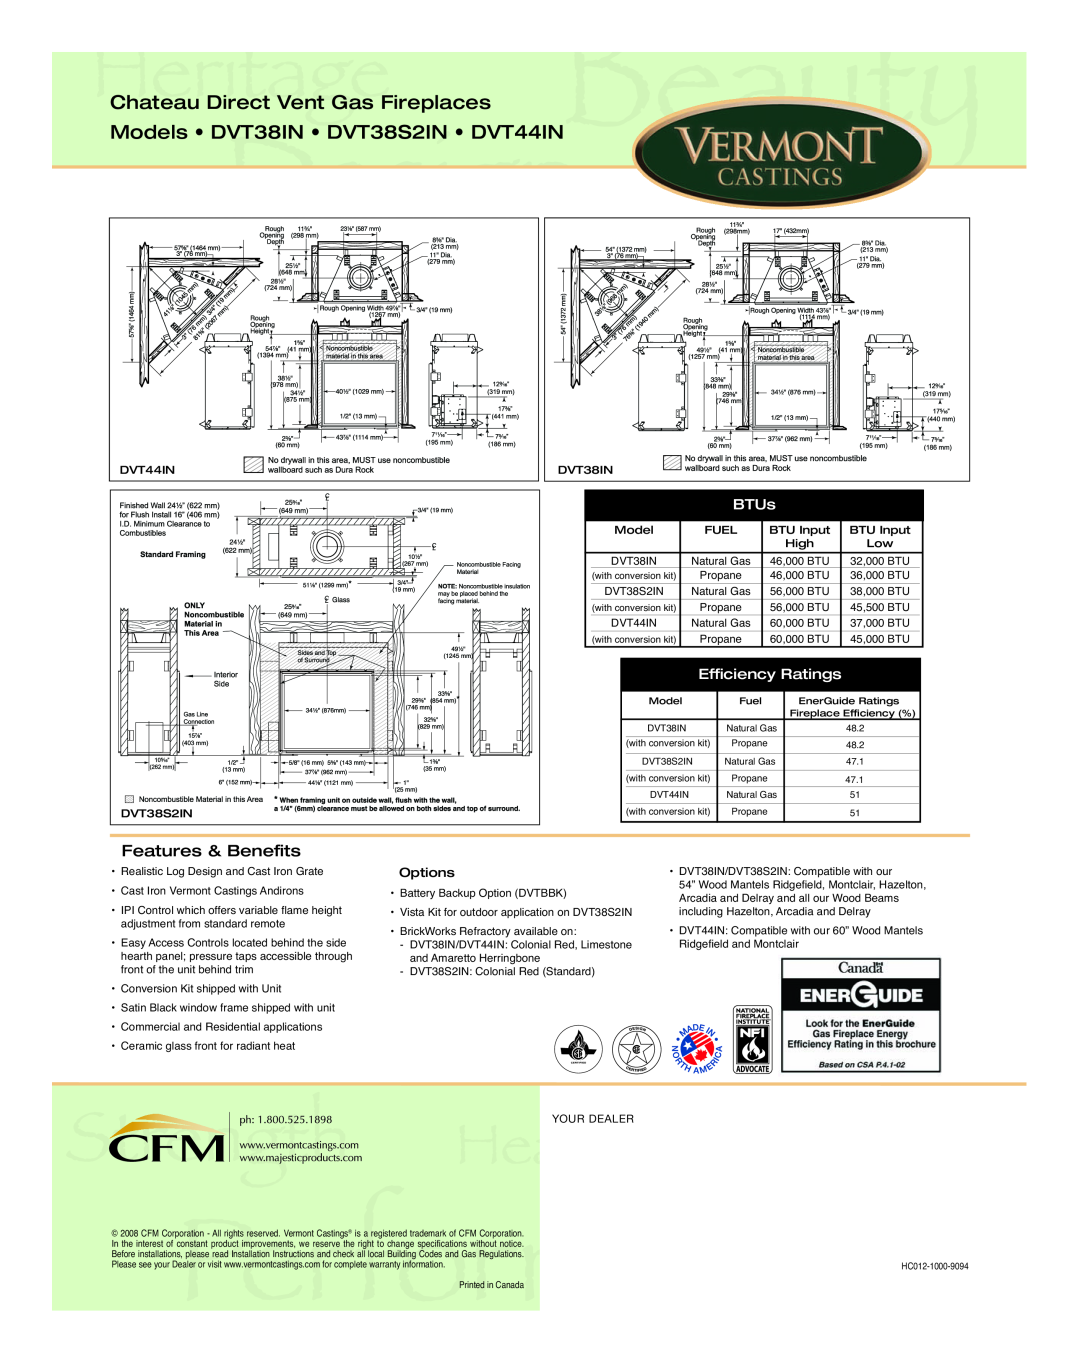 Vermont Casting manual Chateau Direct Vent Gas Fireplaces, Models DVT38IN DVT38S2IN DVT44IN, Features & Benefits, BTUs 